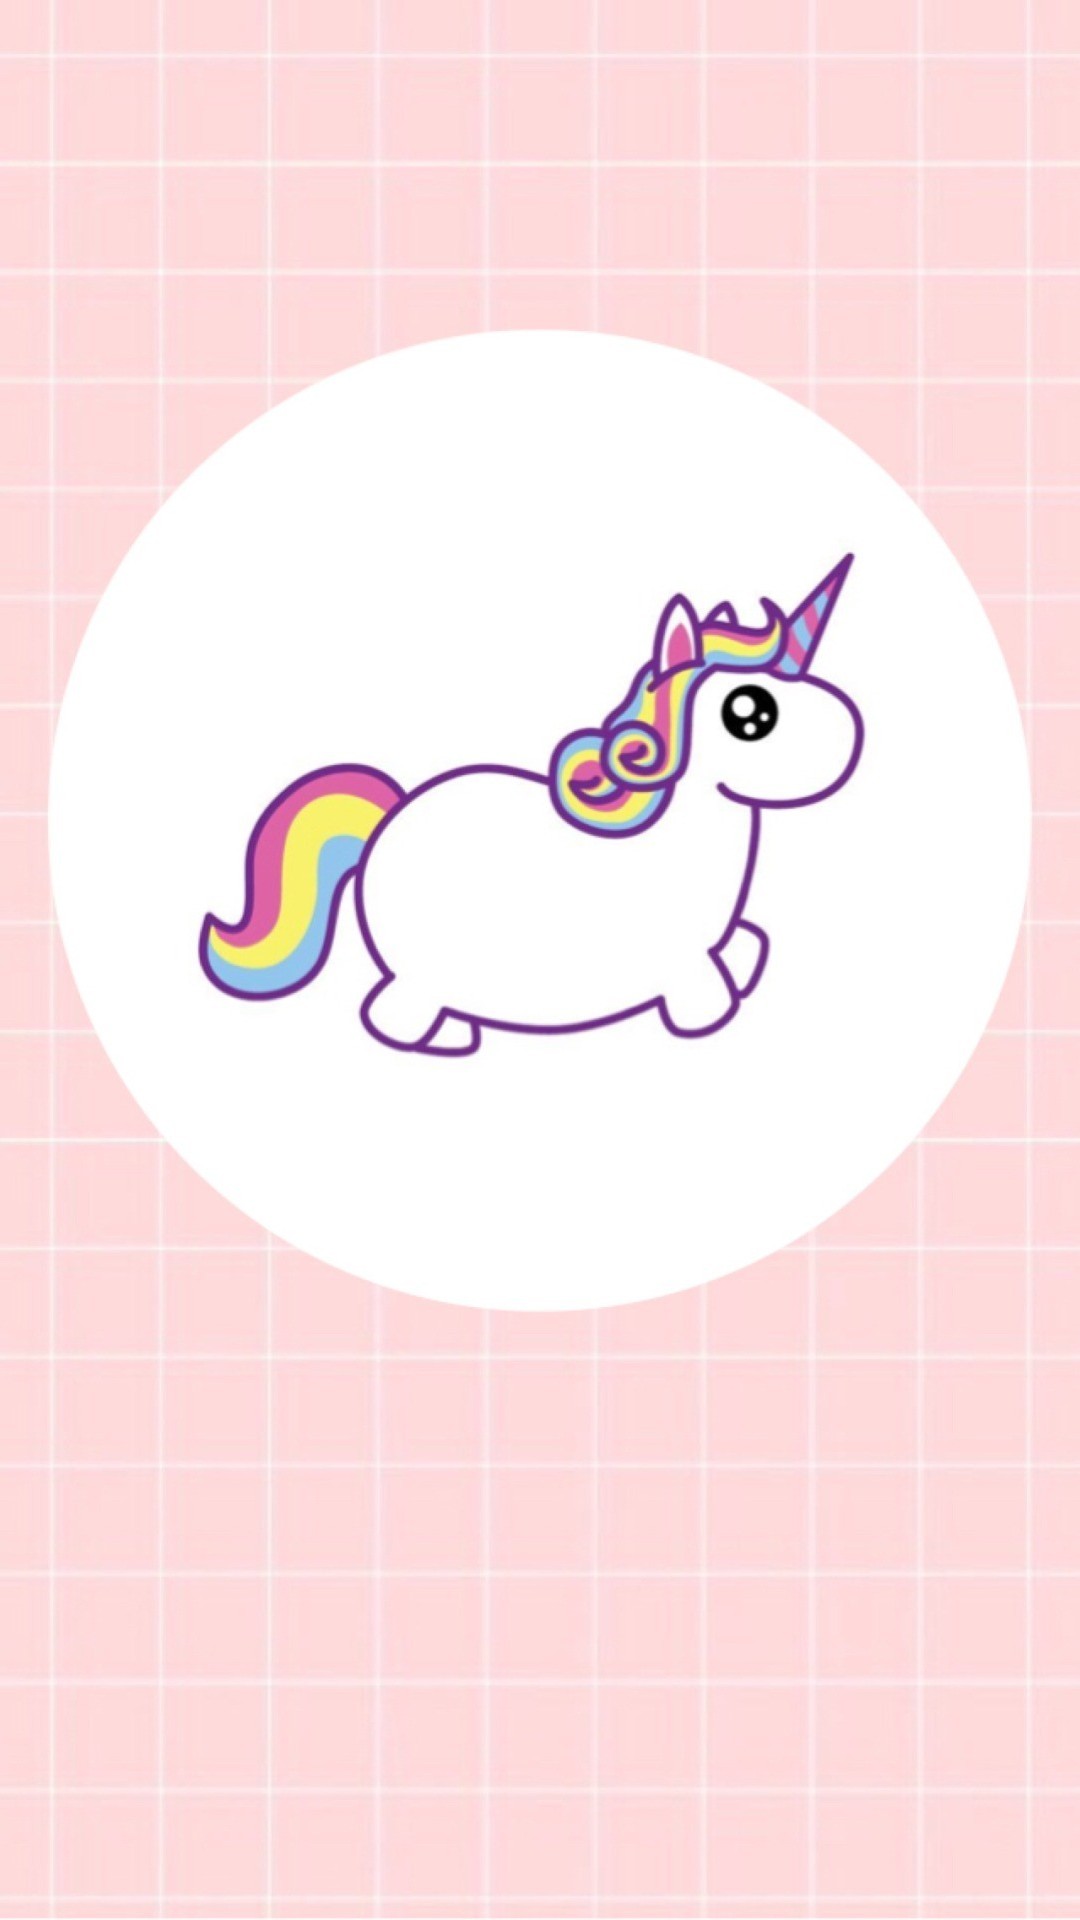 Unicorn Backgrounds For Android with high-resolution 1080x1920 pixel. You can use this wallpaper for your Android backgrounds, Tablet, Samsung Screensavers, Mobile Phone Lock Screen and another Smartphones device